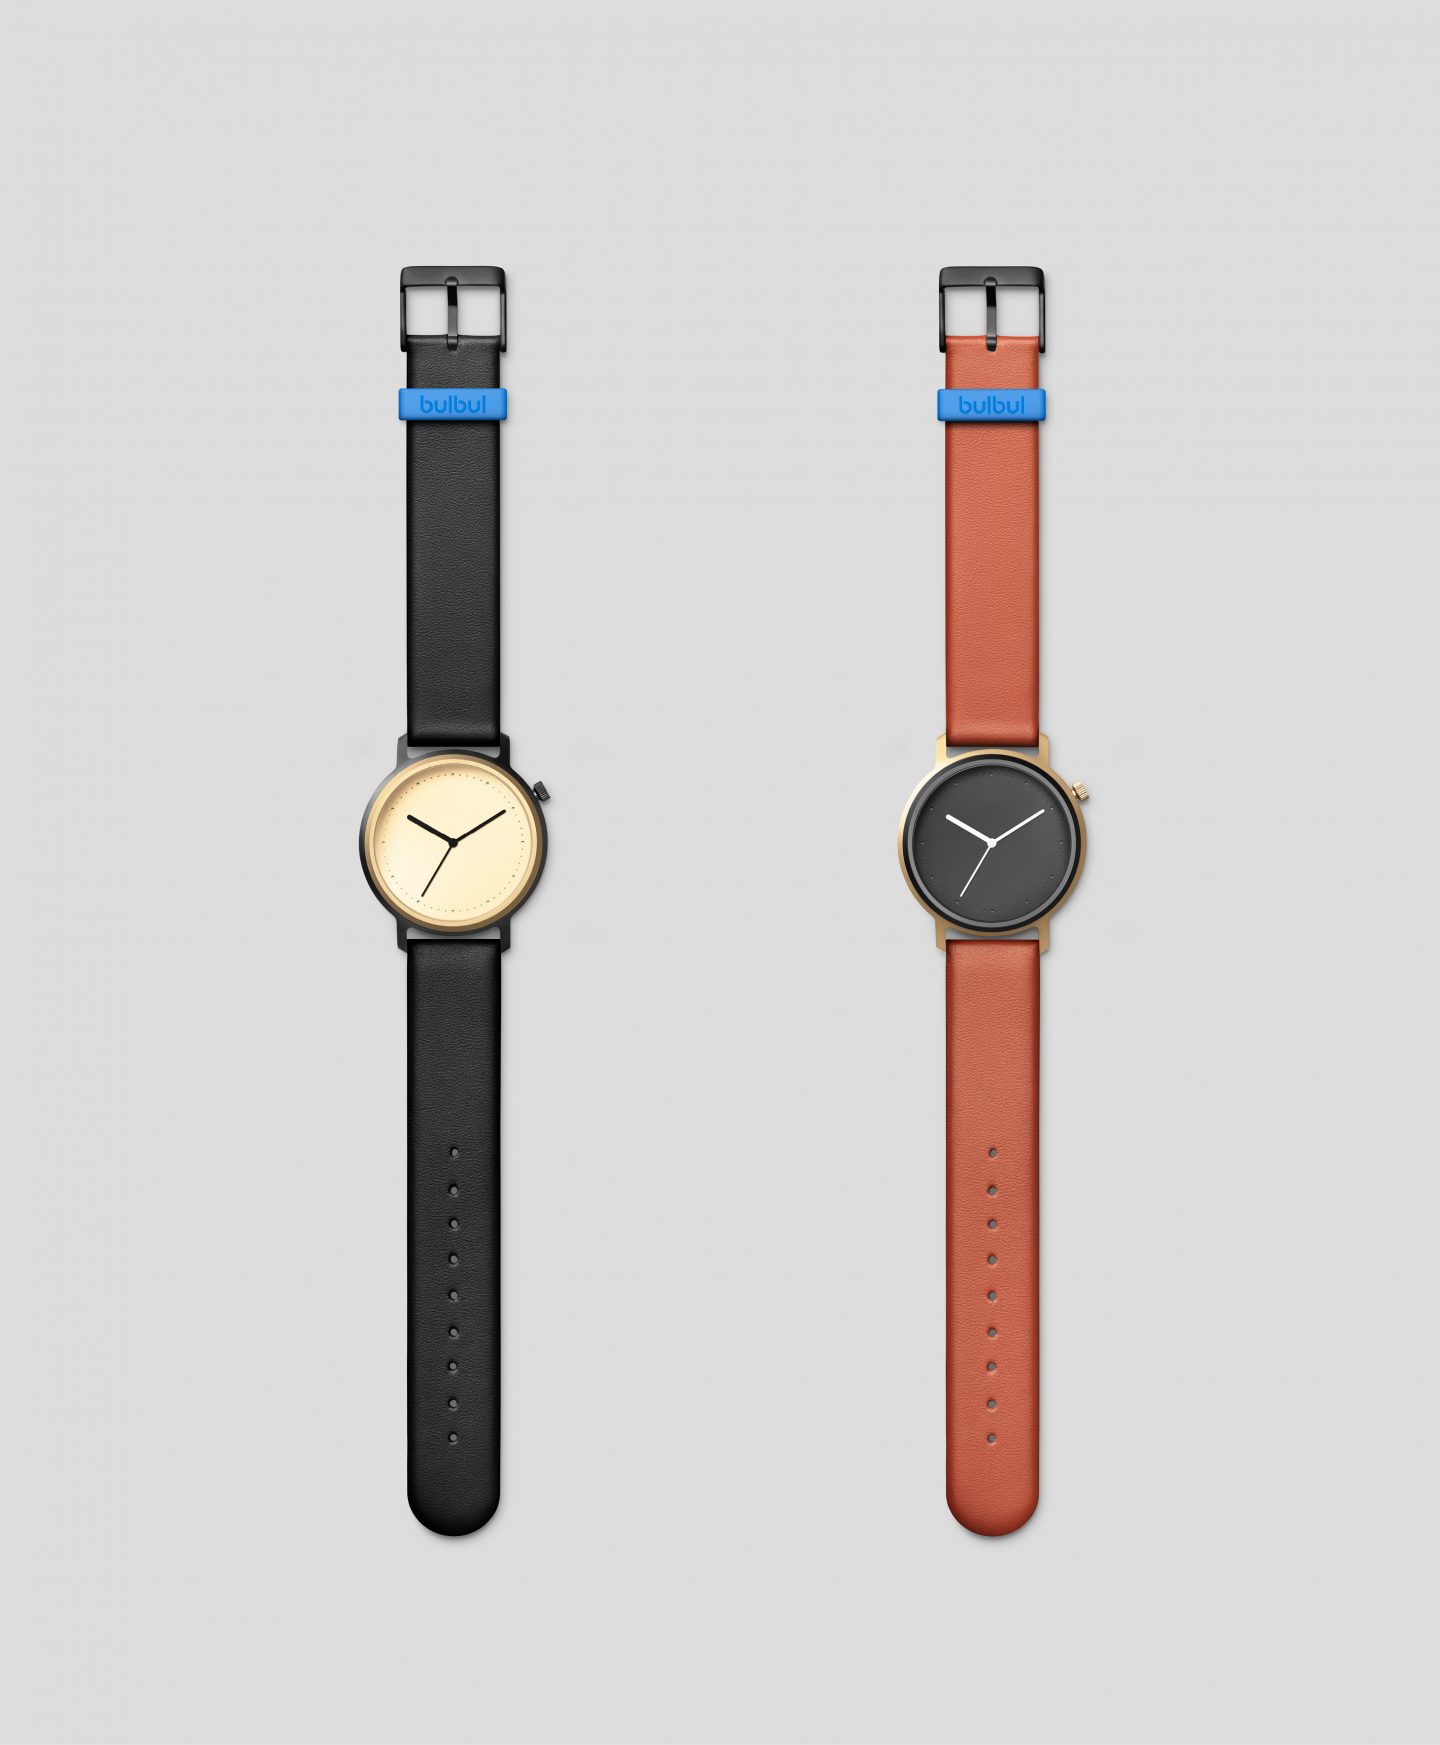 Facette: The New Bulbul Watch by KiBiSi | Bulbul watch, Unusual watches,  Watch design